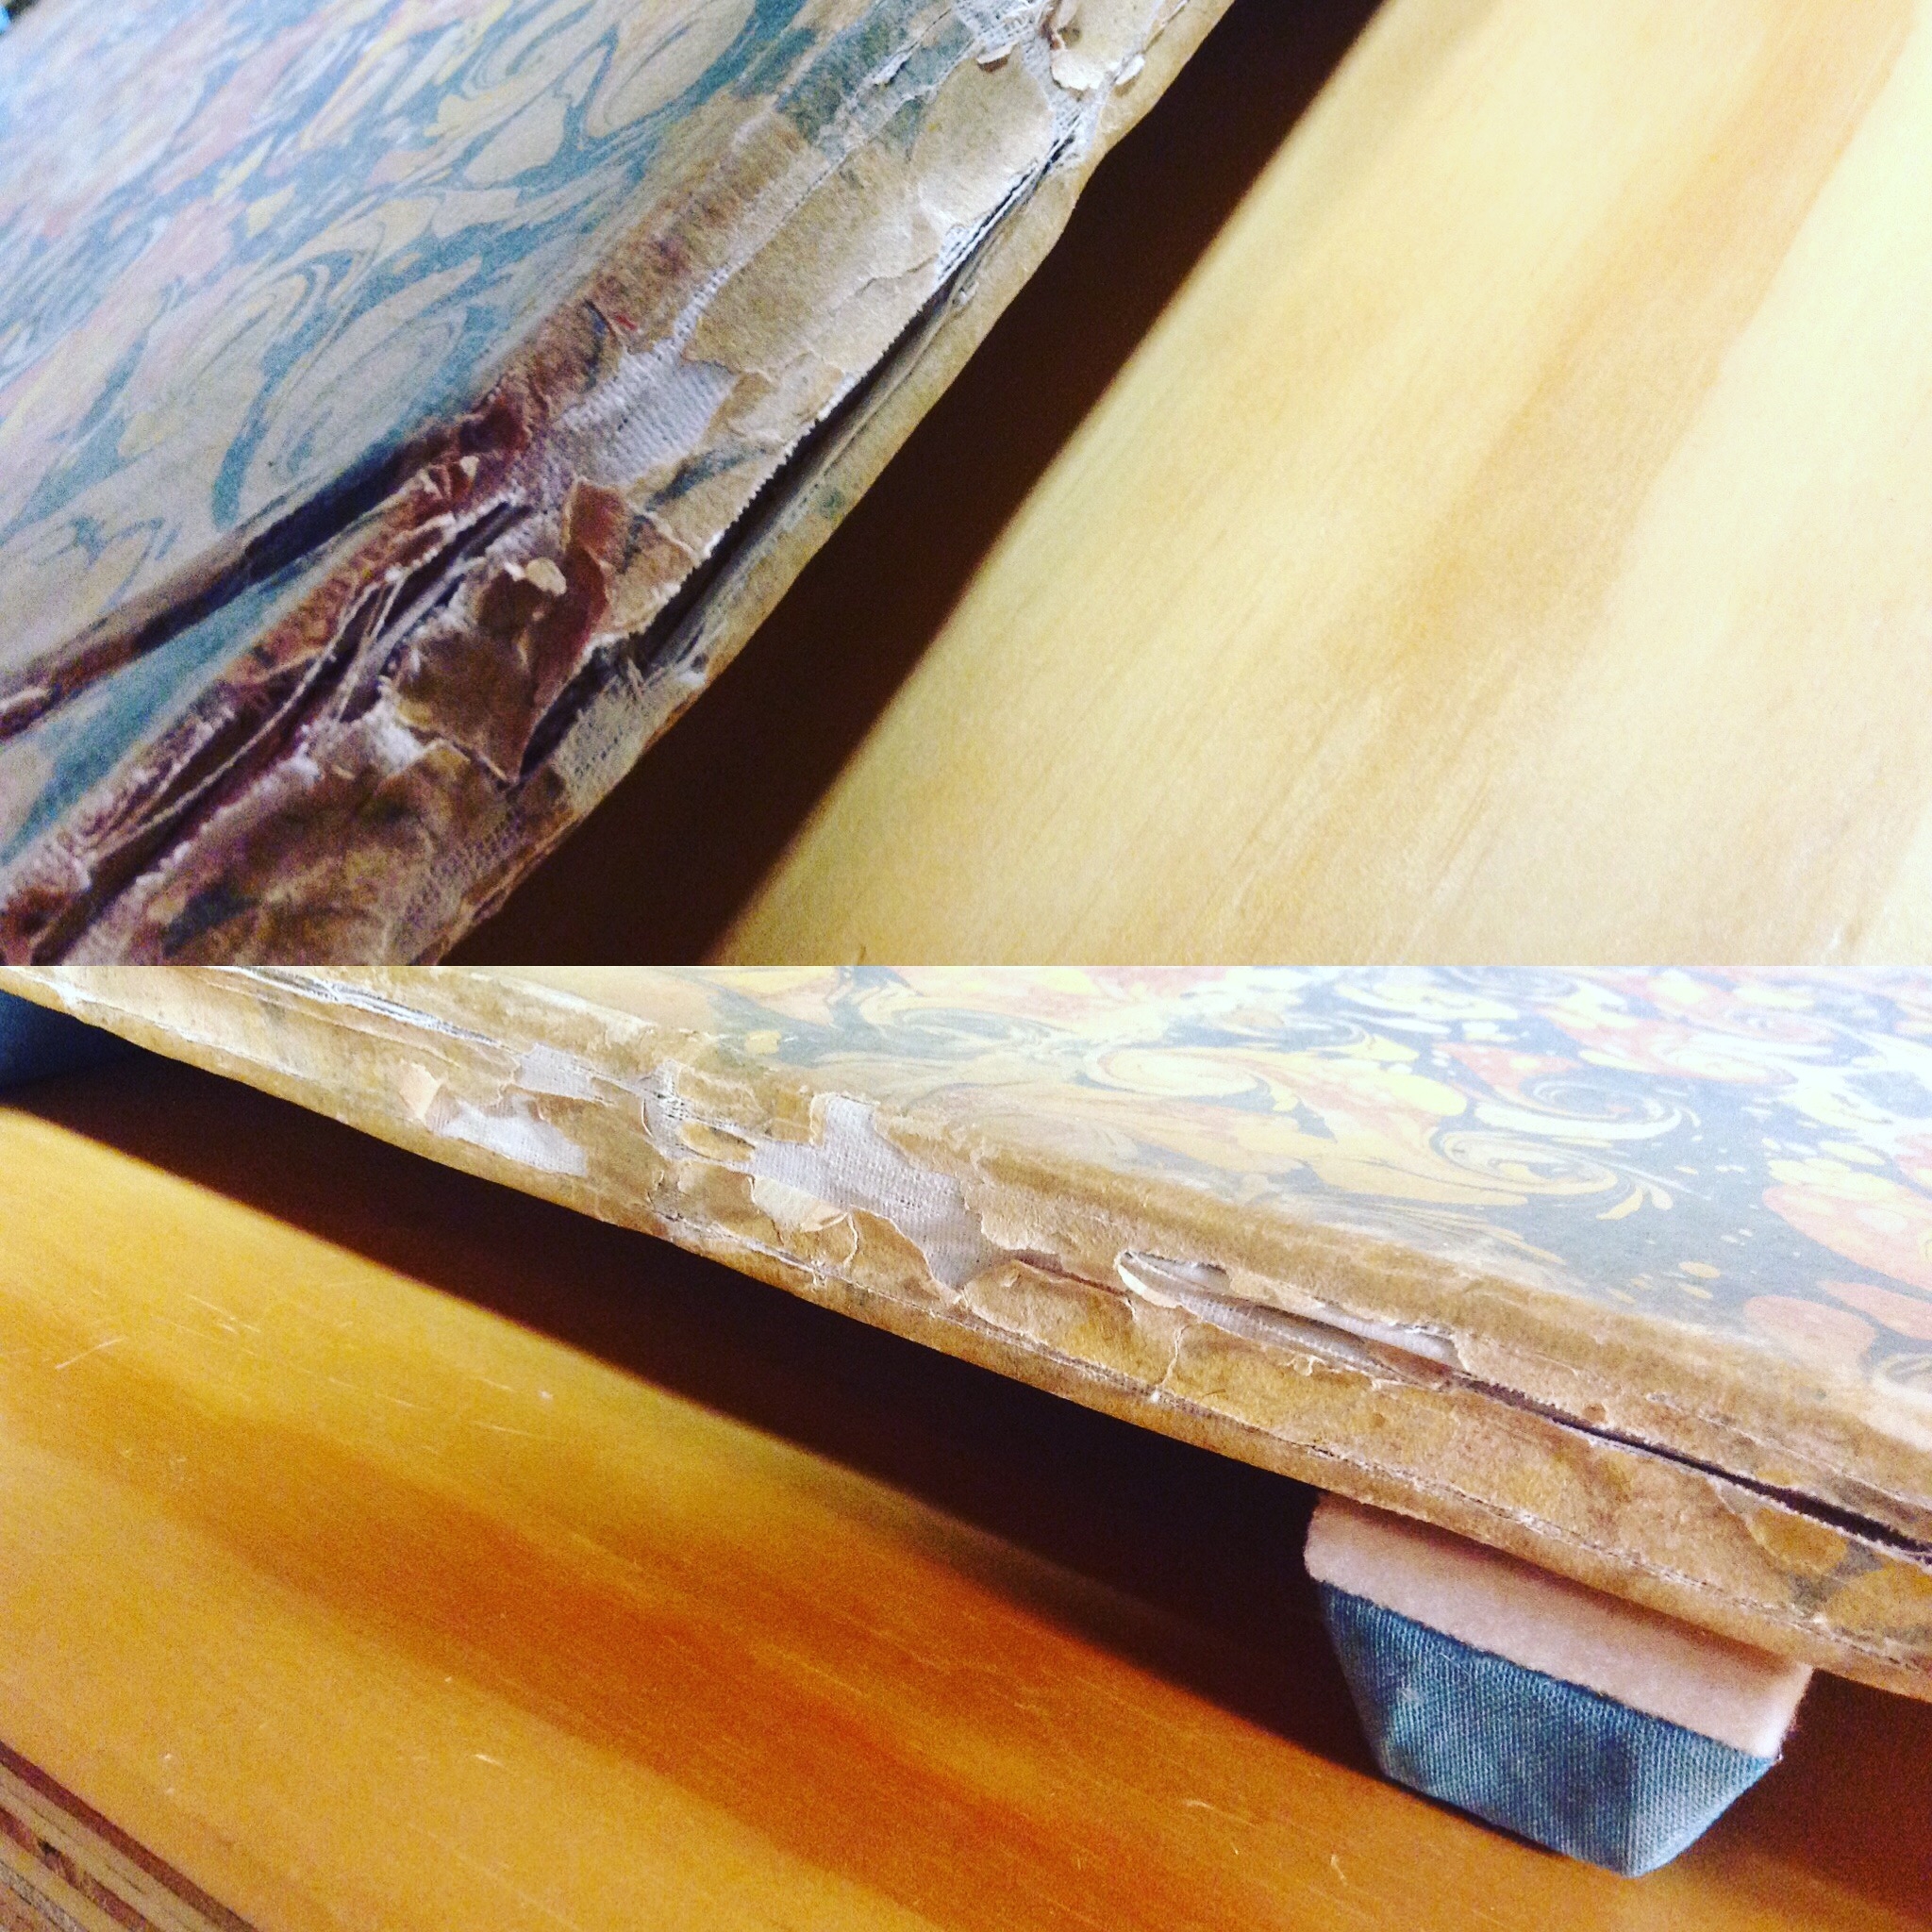  More images of the spine that needs repair work. 